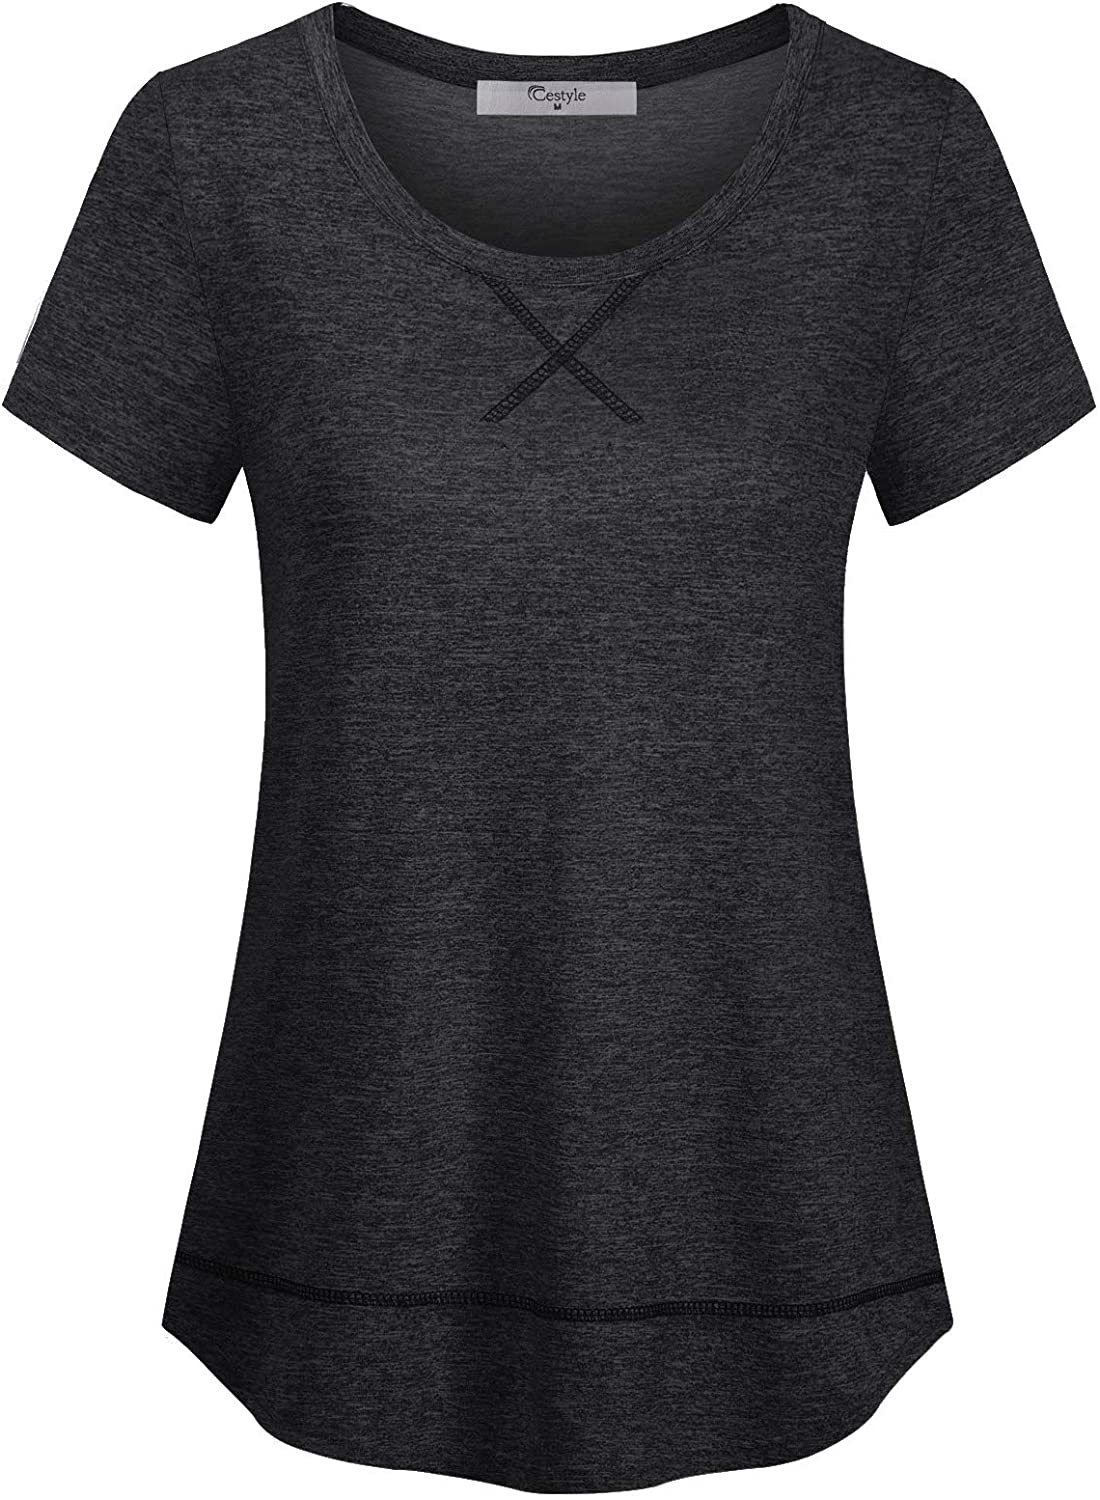 Cestyle Women's Round Neck Yoga Tops Workout Running Shirts Activewear 